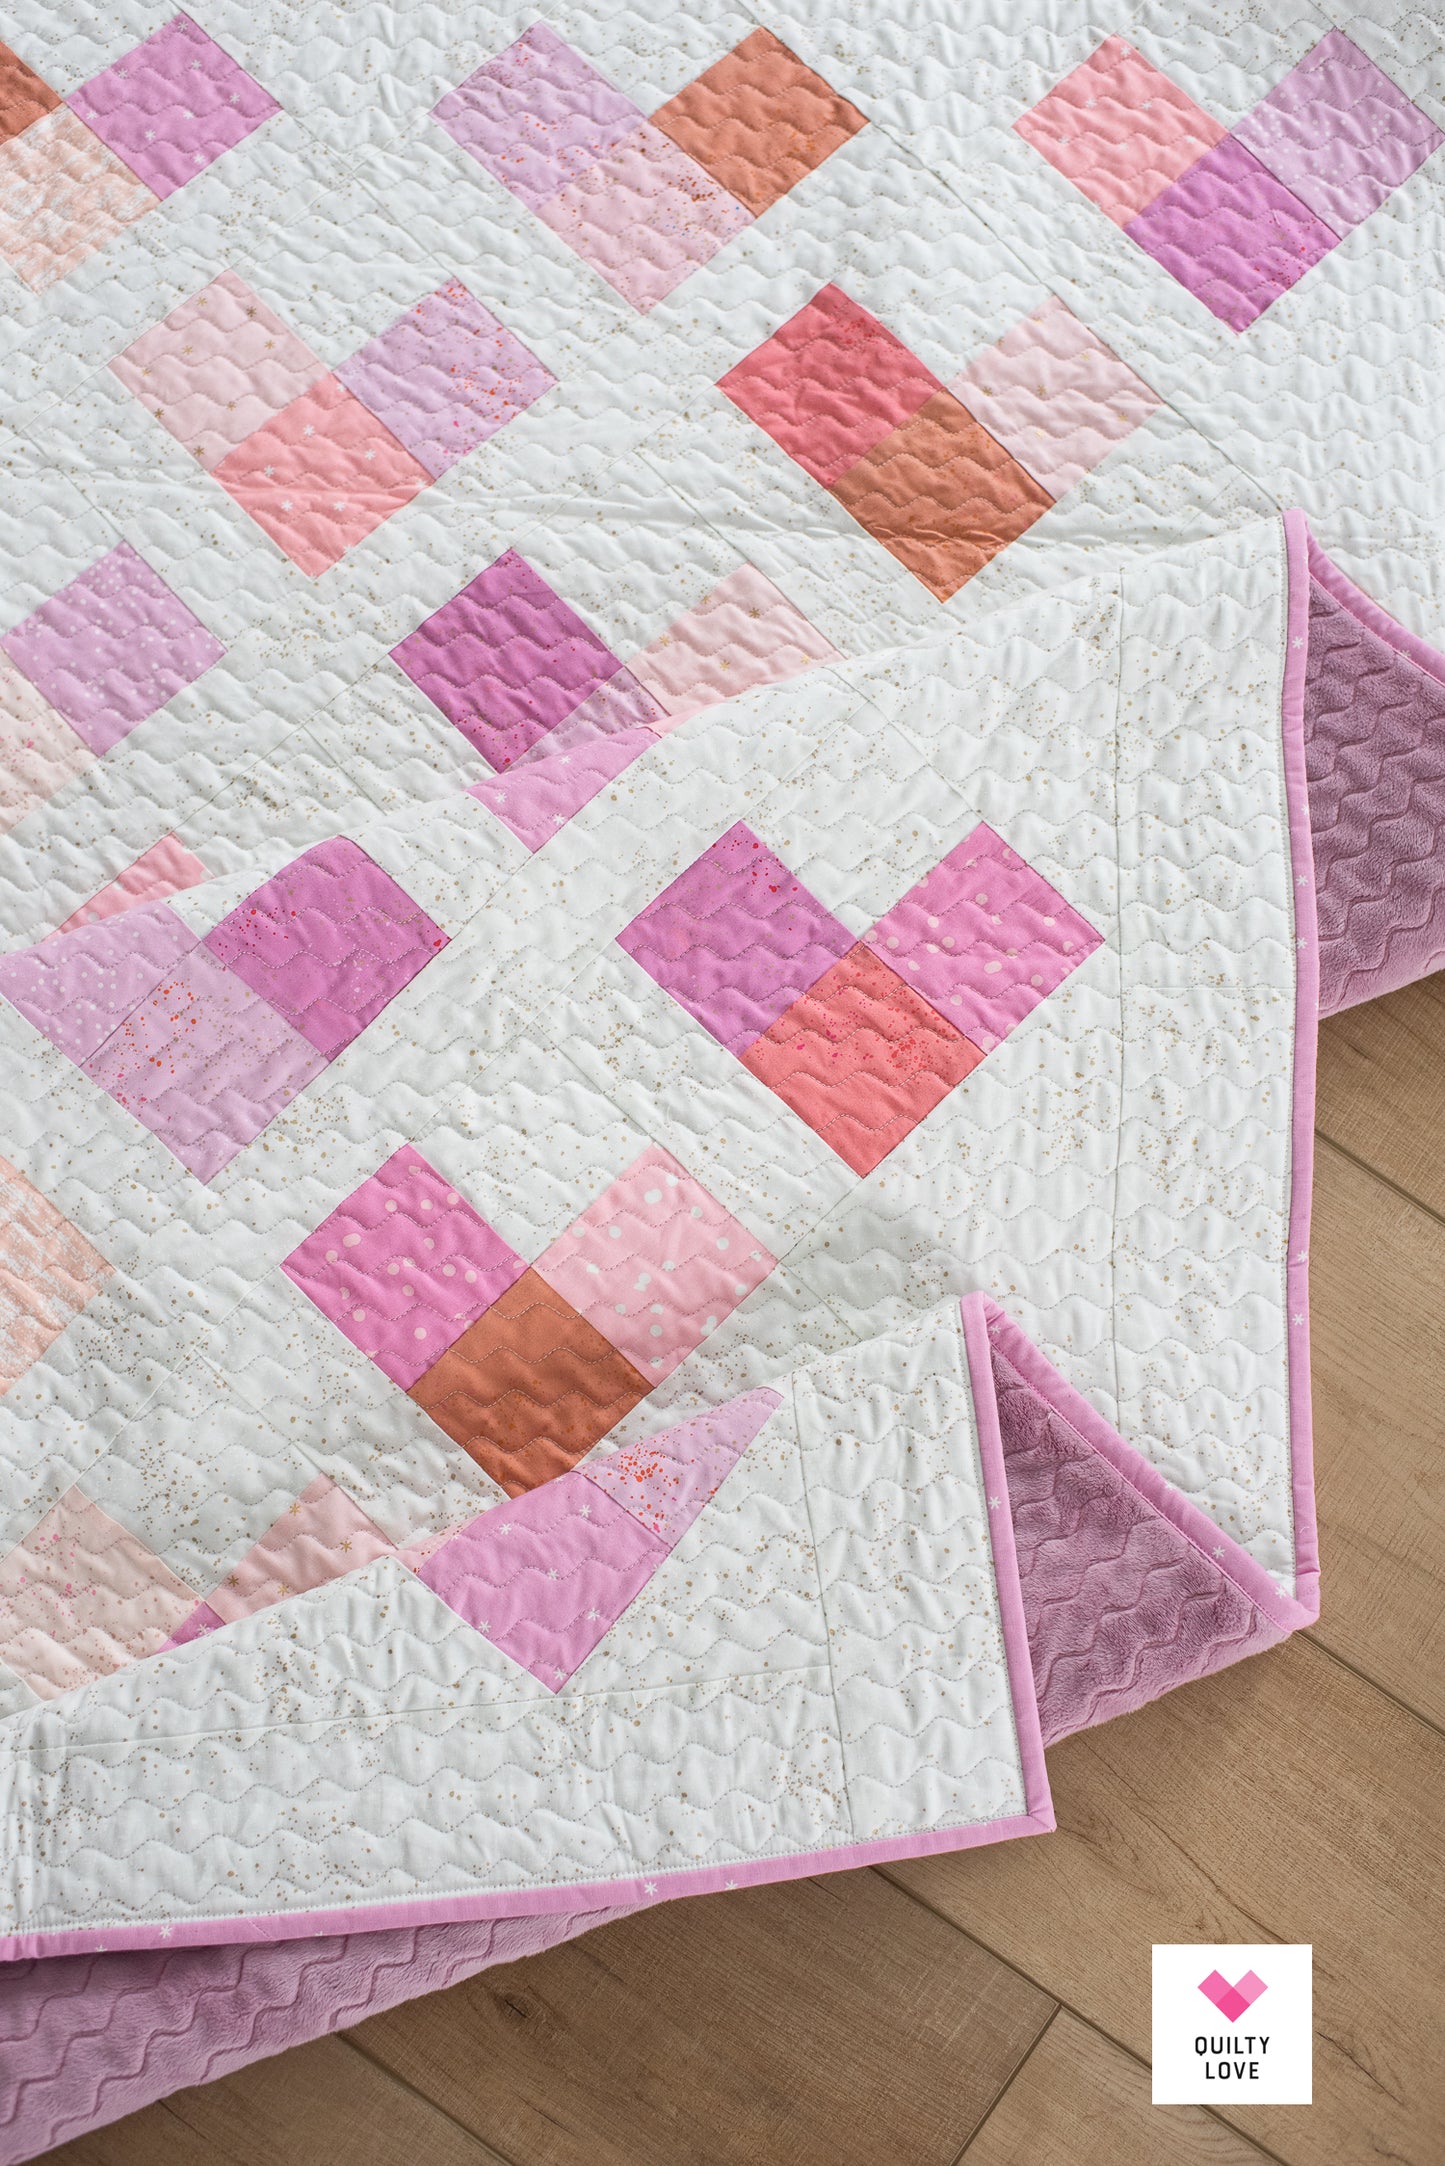 Quilty Hearts Quilt - The scrappy Ruby Star Society one - Minky backing